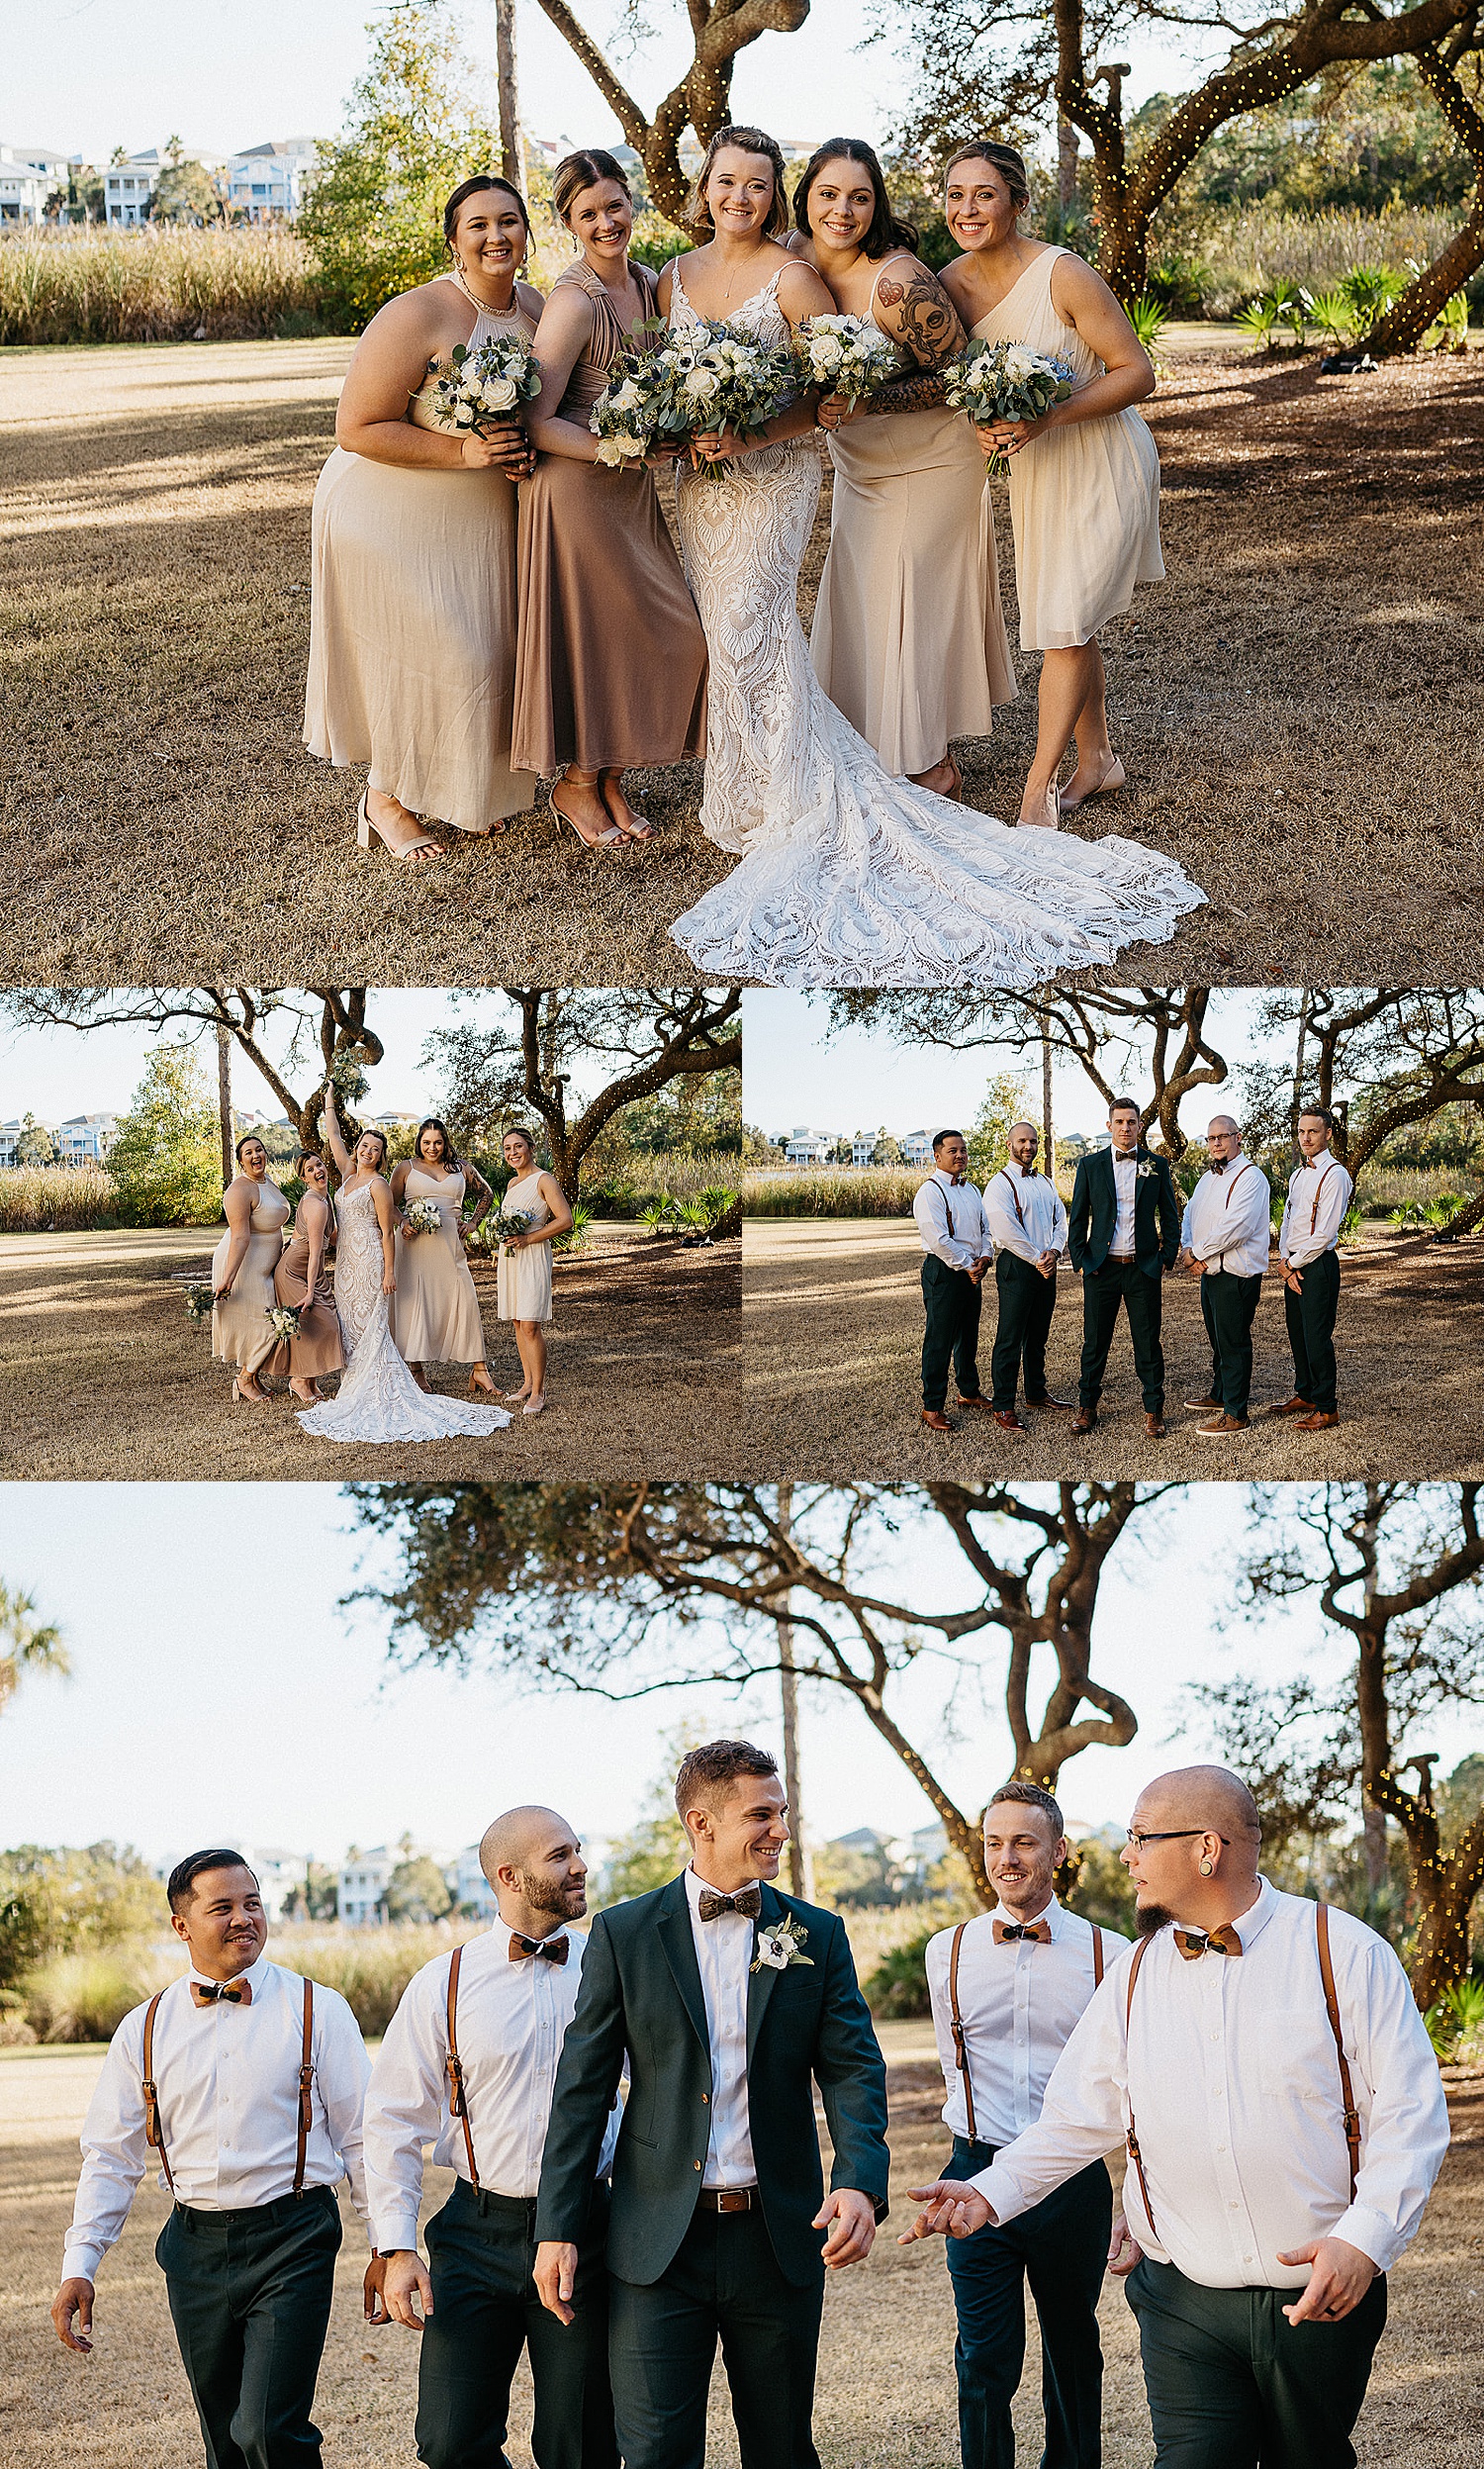 Bridesmaids wearing different nude dresses holding wedding bouquets